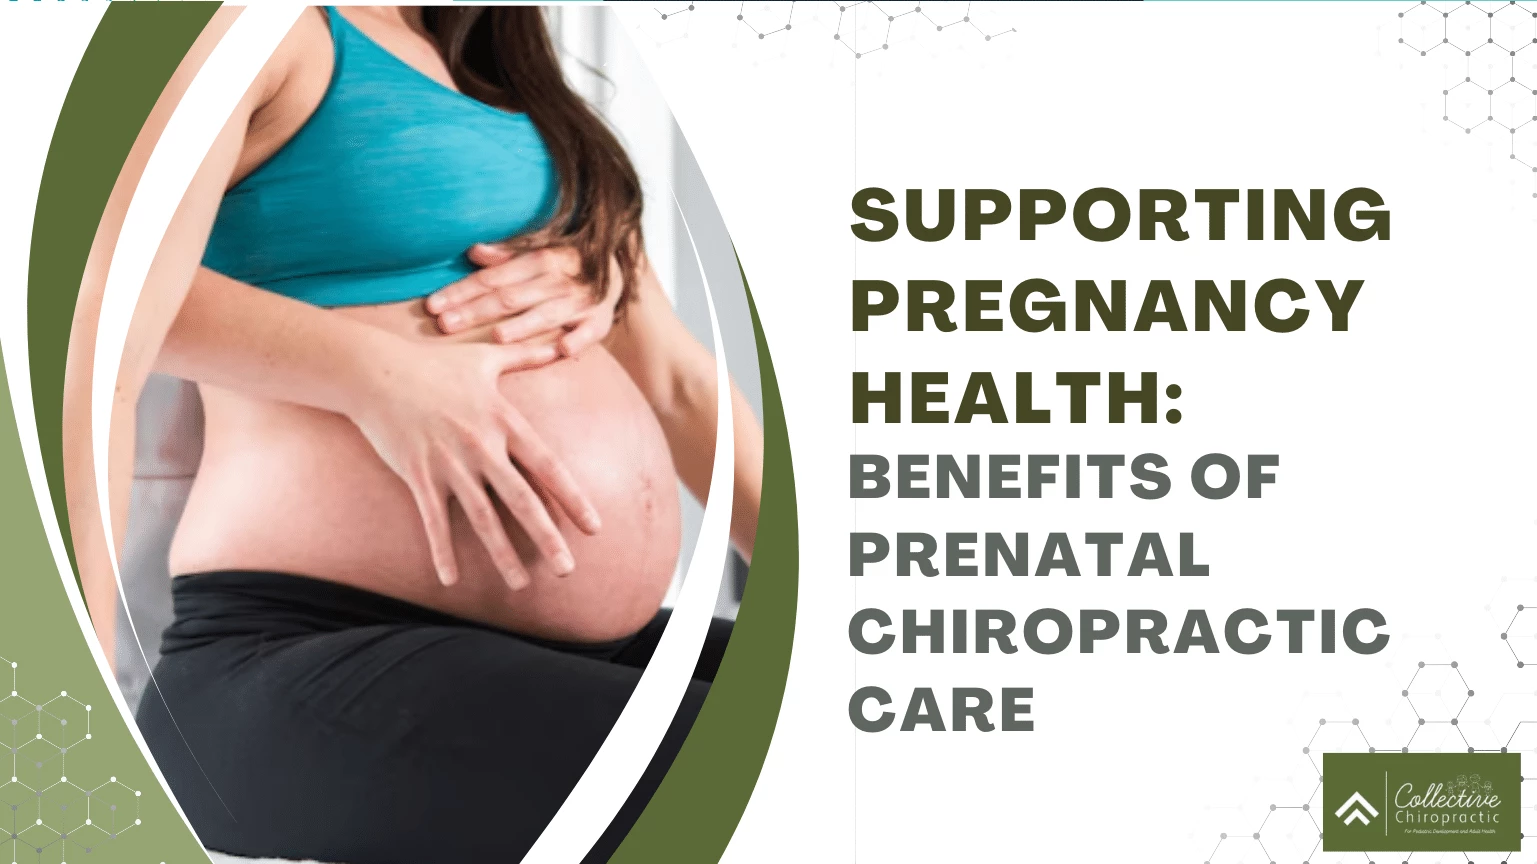 Supporting Pregnancy Health Benefits of Prenatal Chiropractic Care